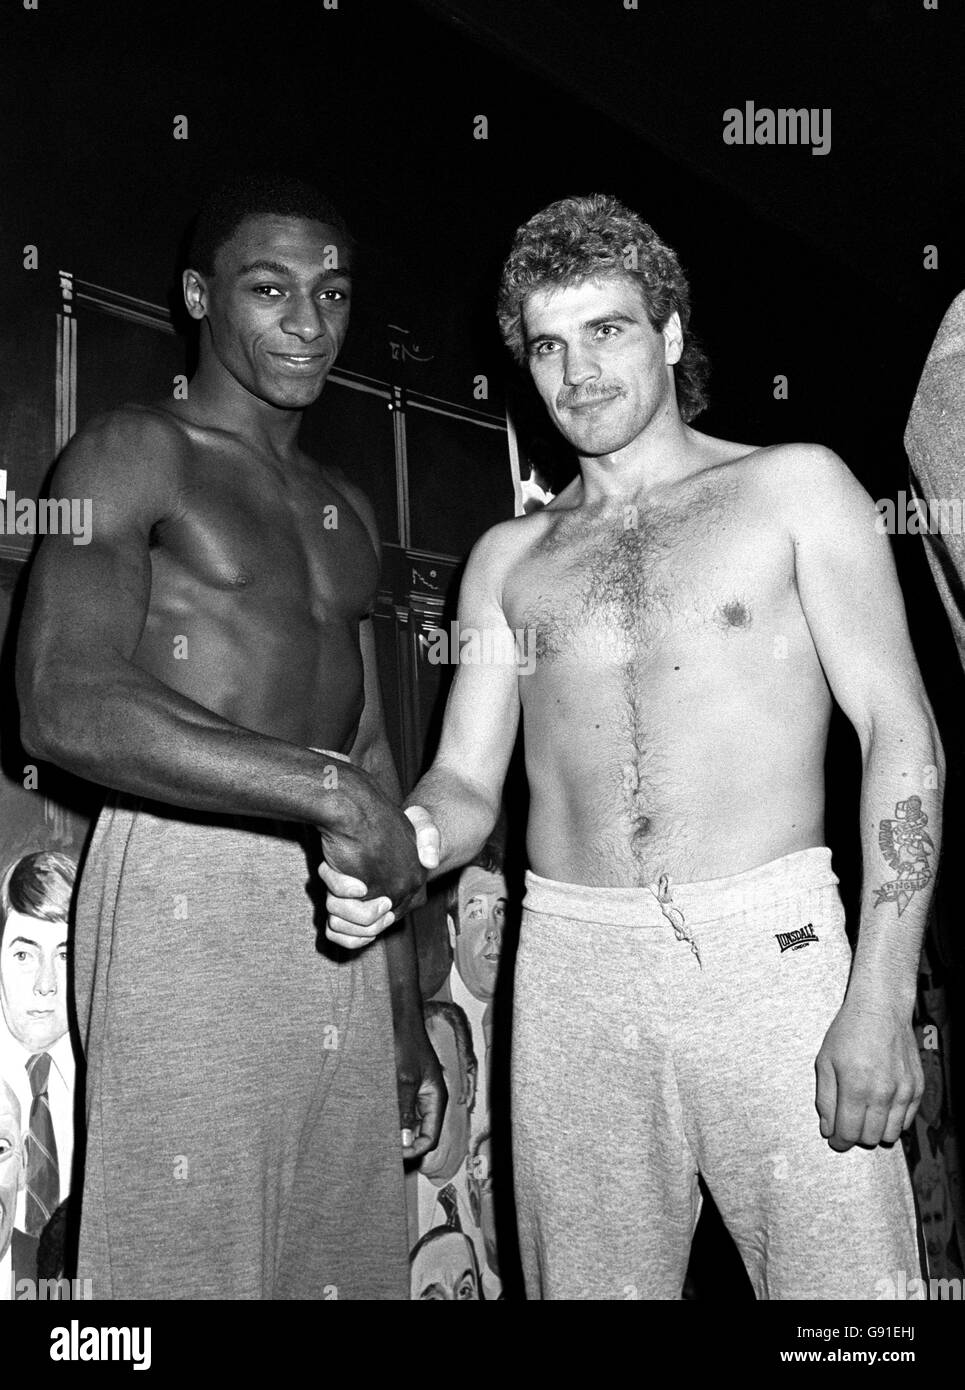 Cordial greetings between Sheffield boxer Herol 'Bomber' Graham (left) and Belgium's Jose Seys at the weigh-in. Stock Photo